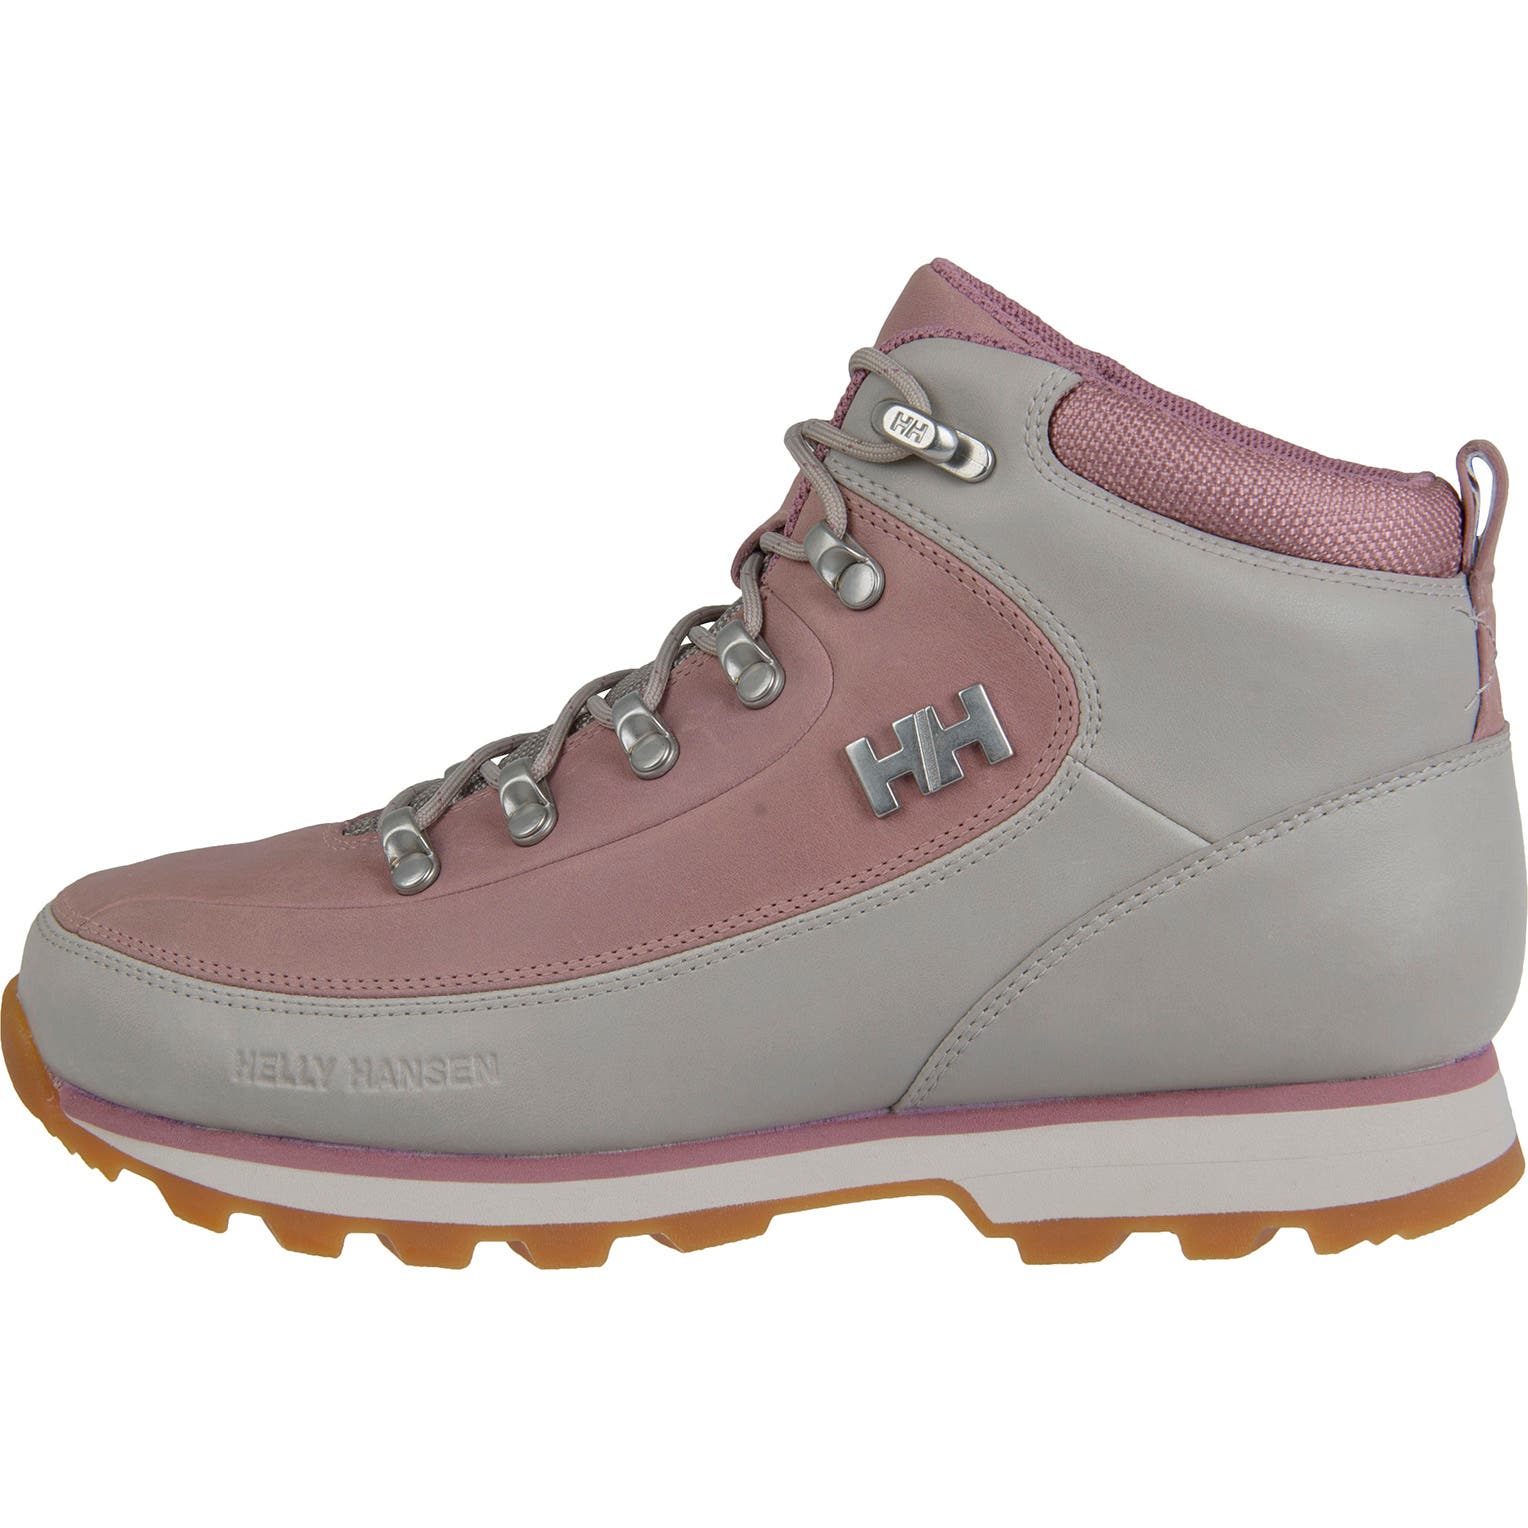 Helly Hansen Women's The Forester Winter Boot in Silver Cloud-Bridal Ros from the side